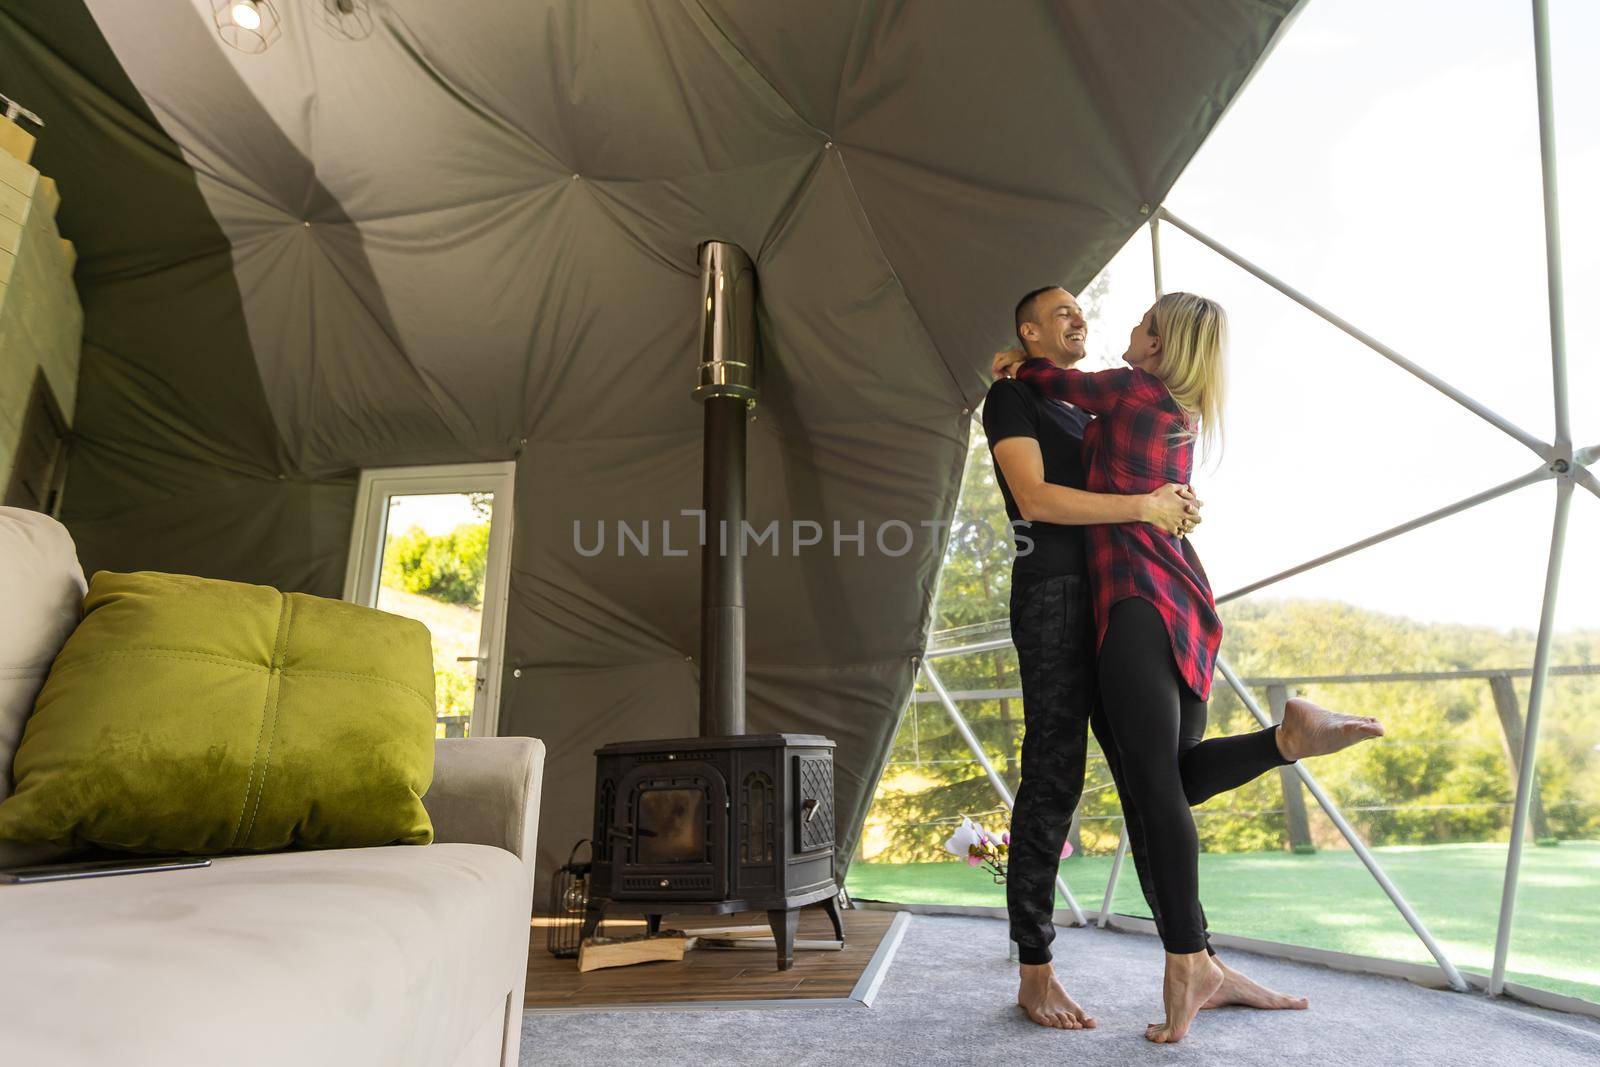 a couple in geo dome tents. Cozy, camping, glamping, holiday, vacation lifestyle concept. Outdoors cabin, scenic background